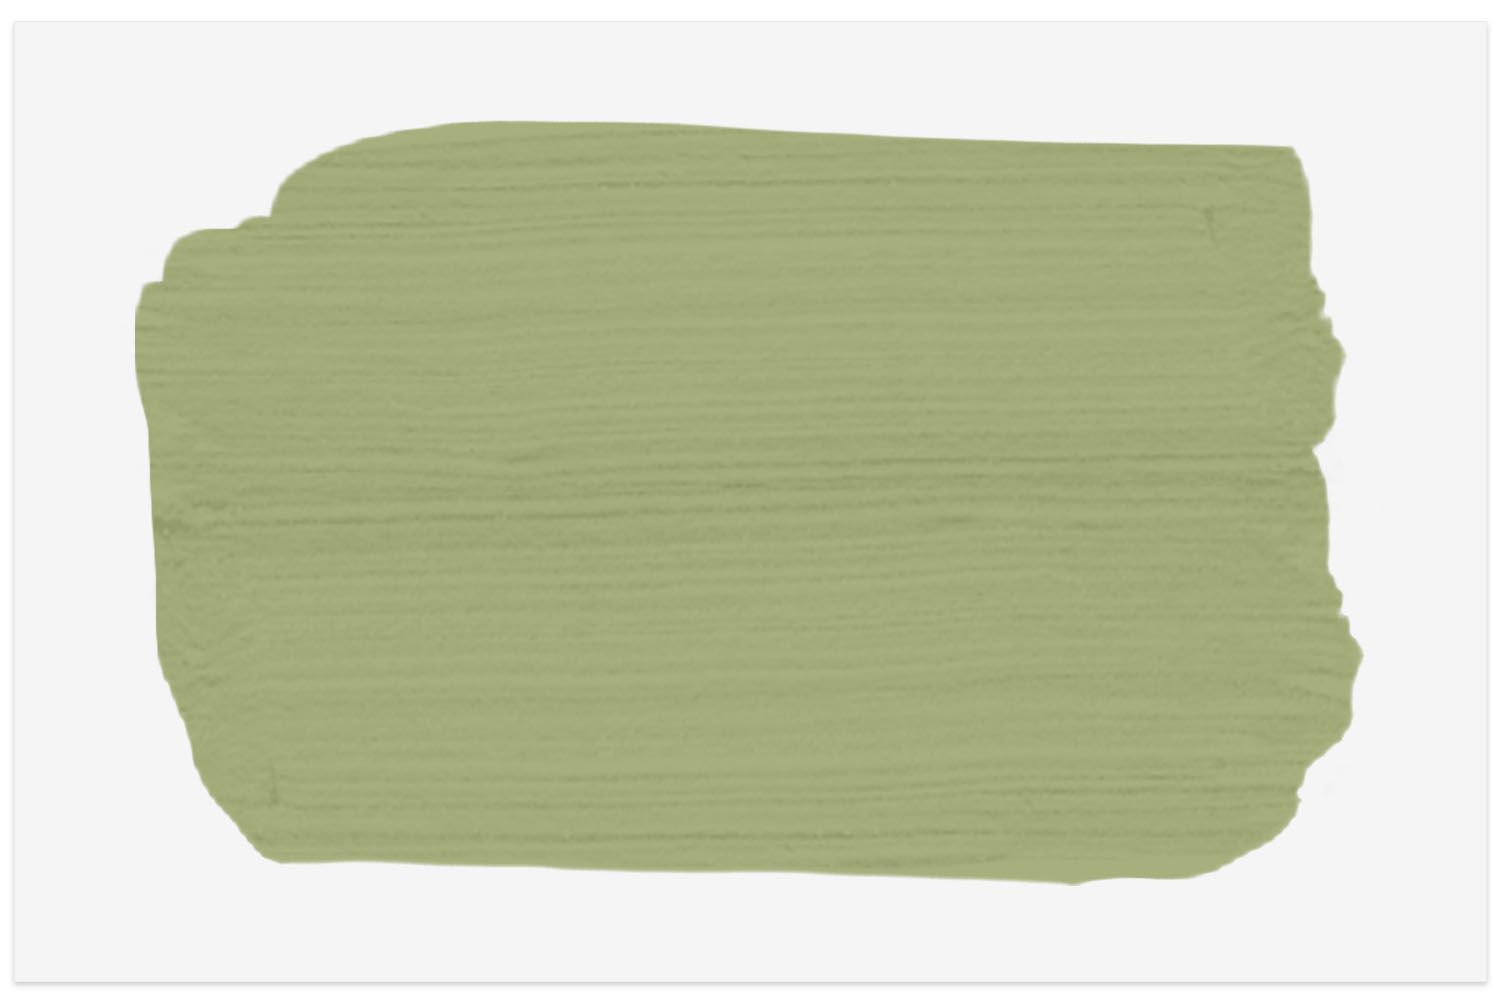 BestHome365 Paint color swatch in Matcha